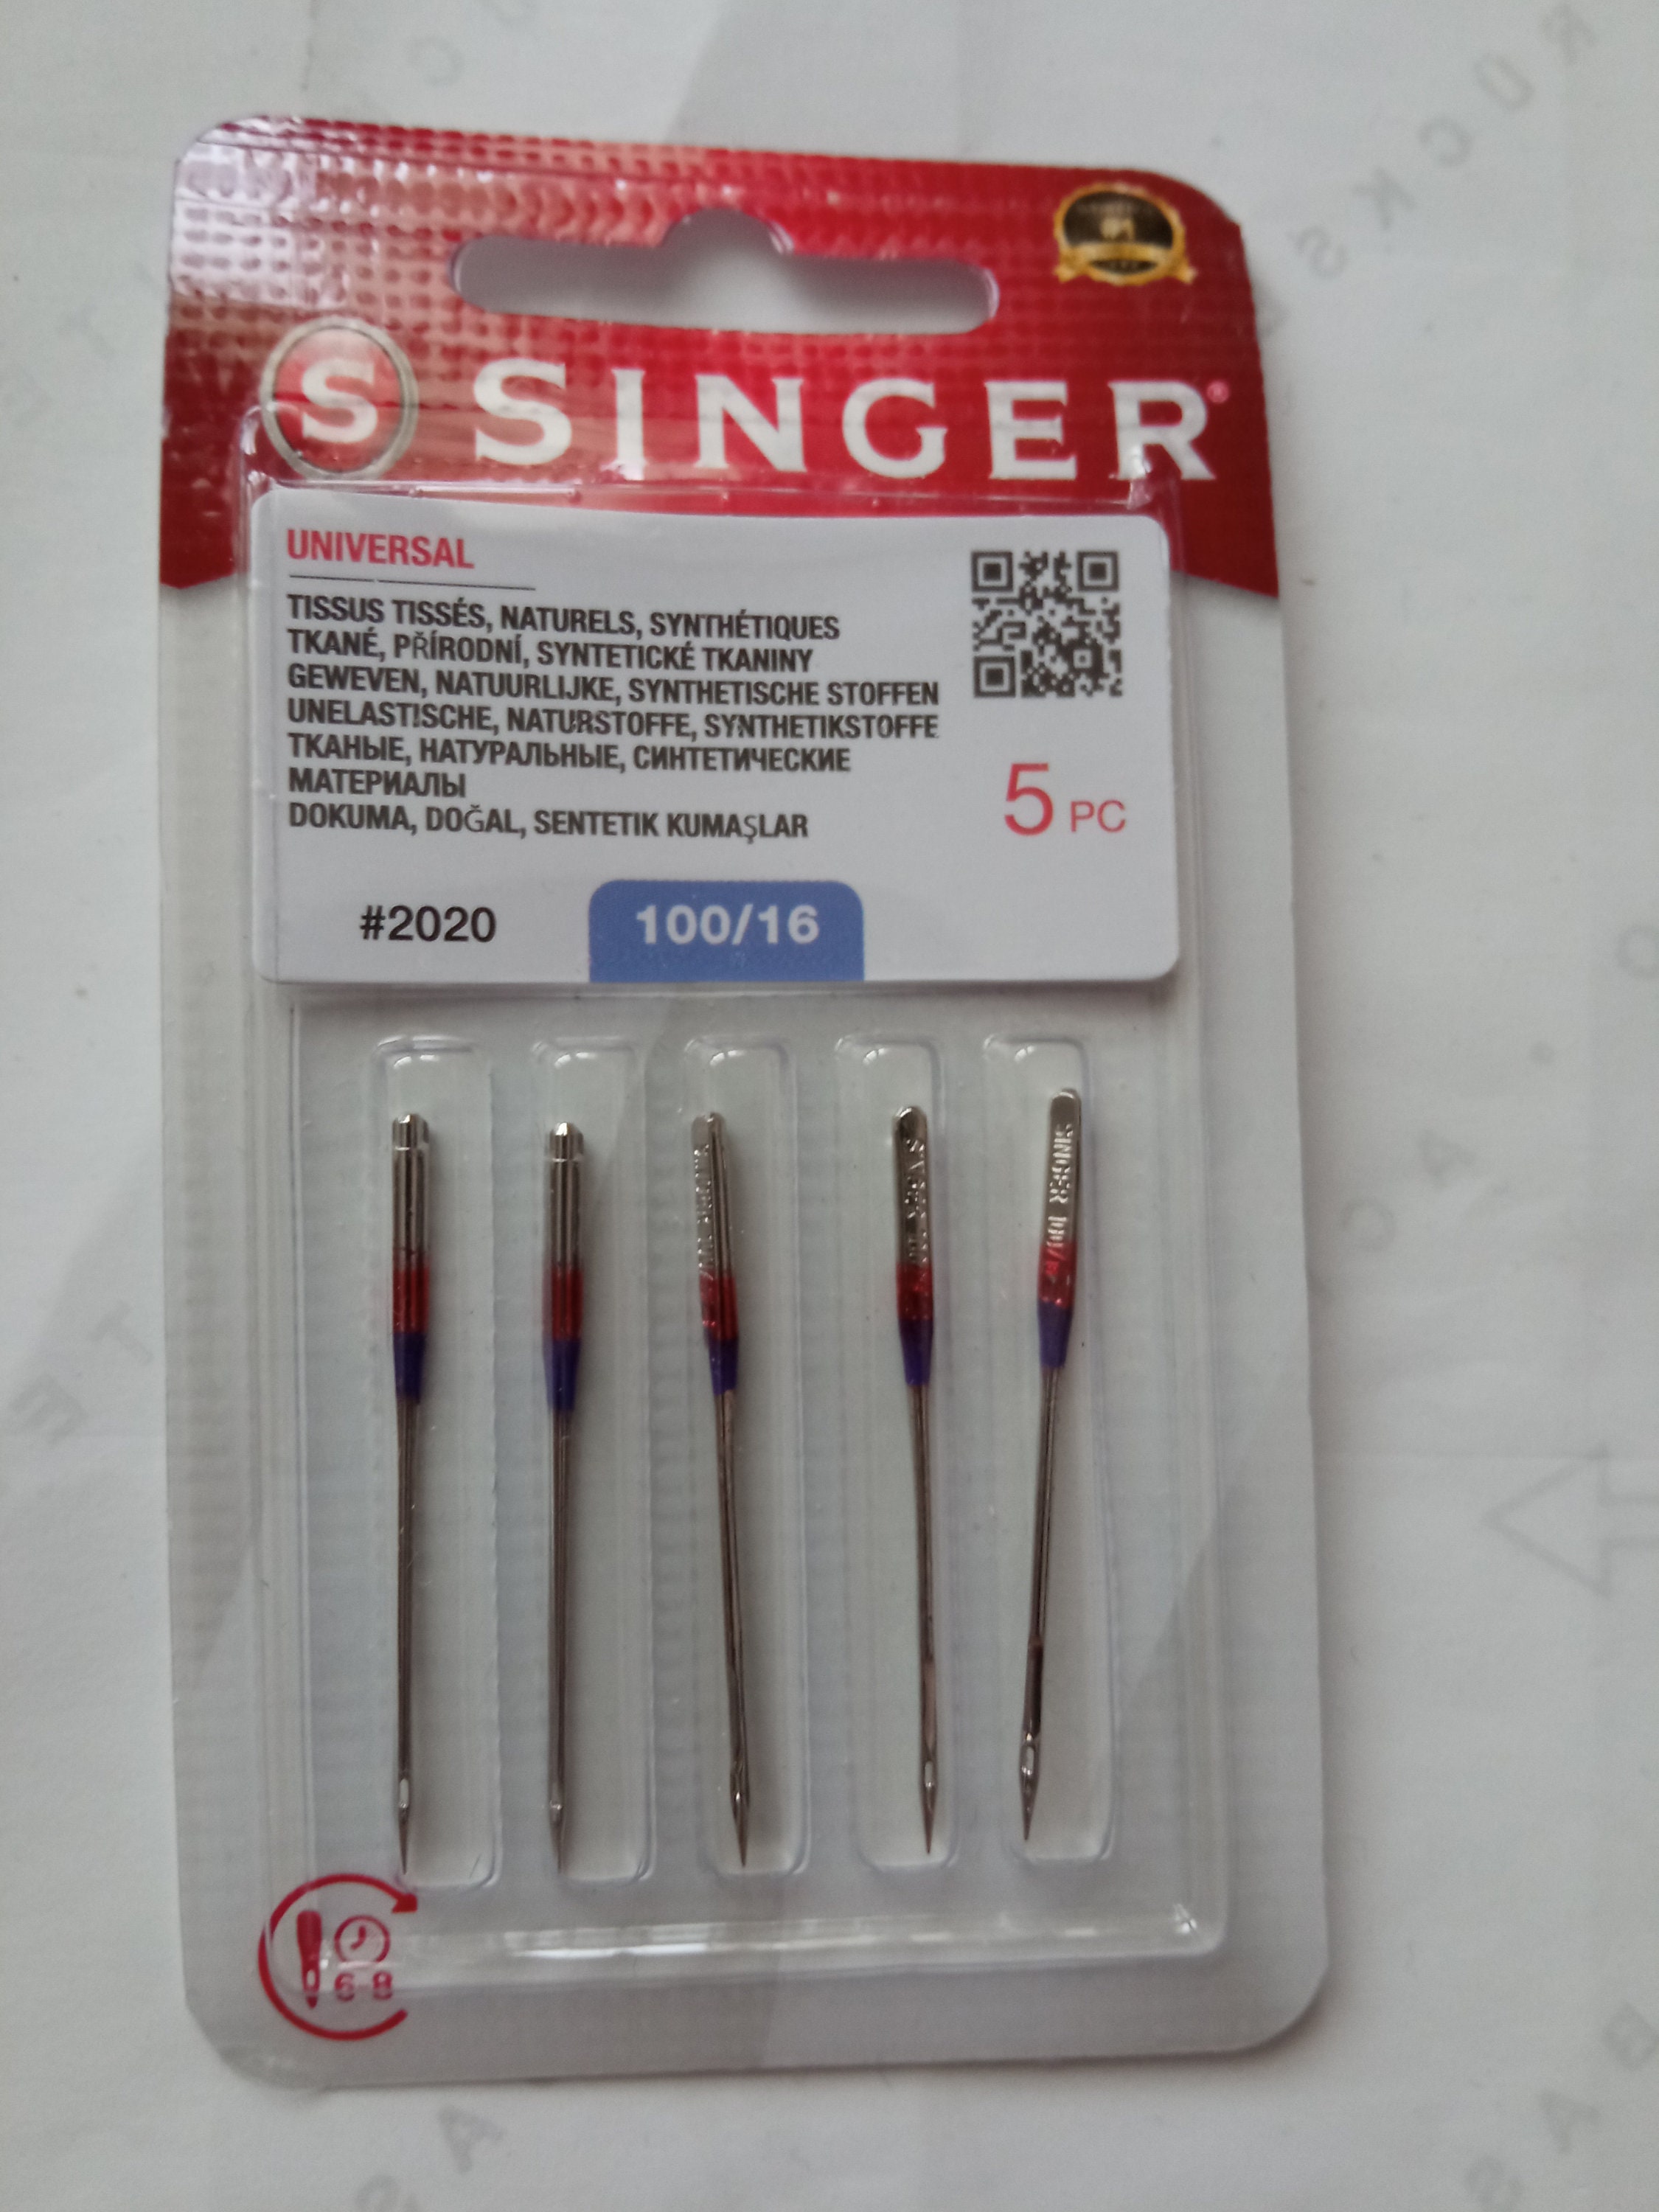 Singer 20 Counts :10-Pack Universal 2020 Sewing Machine Needles, Size 90/14  and Singer 10-Pack Stretch 2045 Sewing Machine Needles, Size 90/14 Bundle